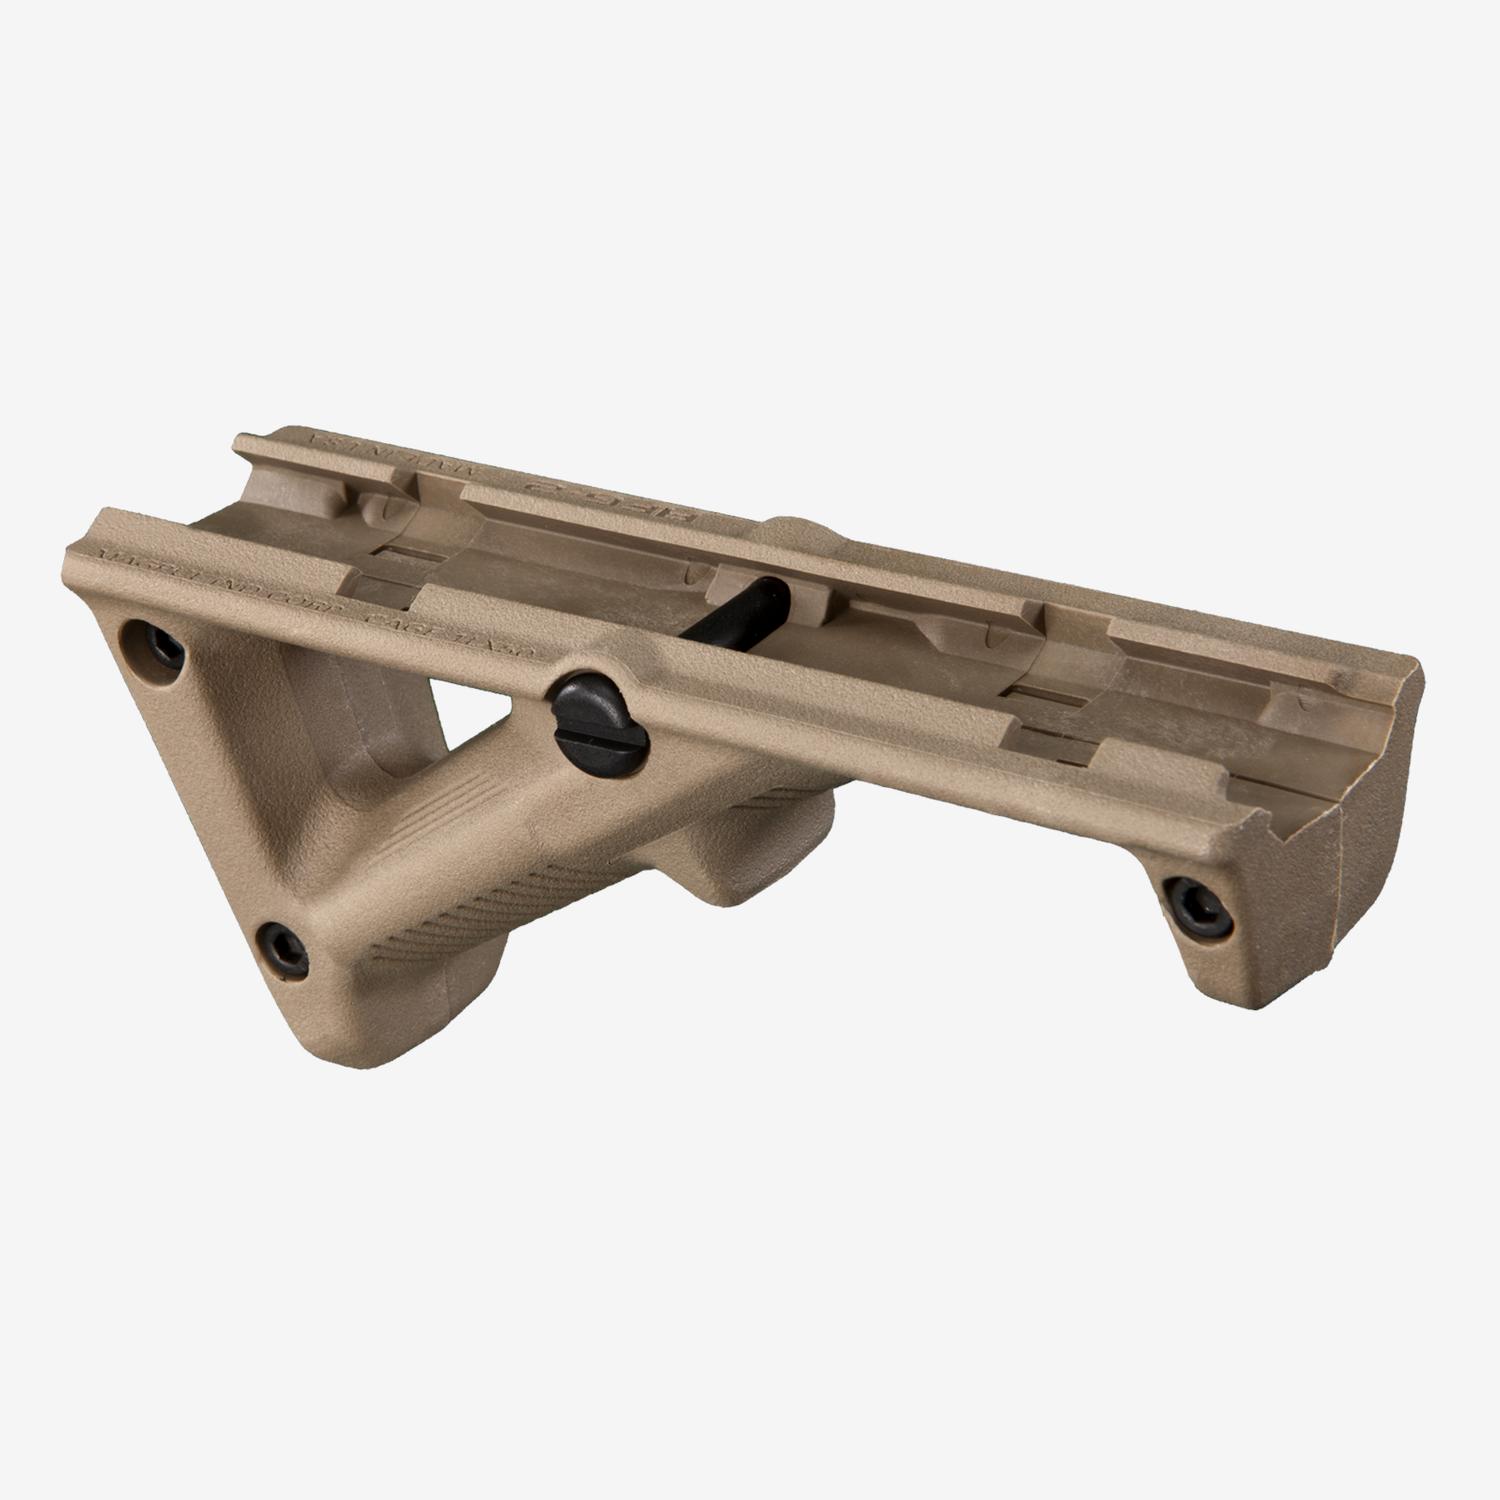  Angled Fore Grip 2 (Afg2)- Fde